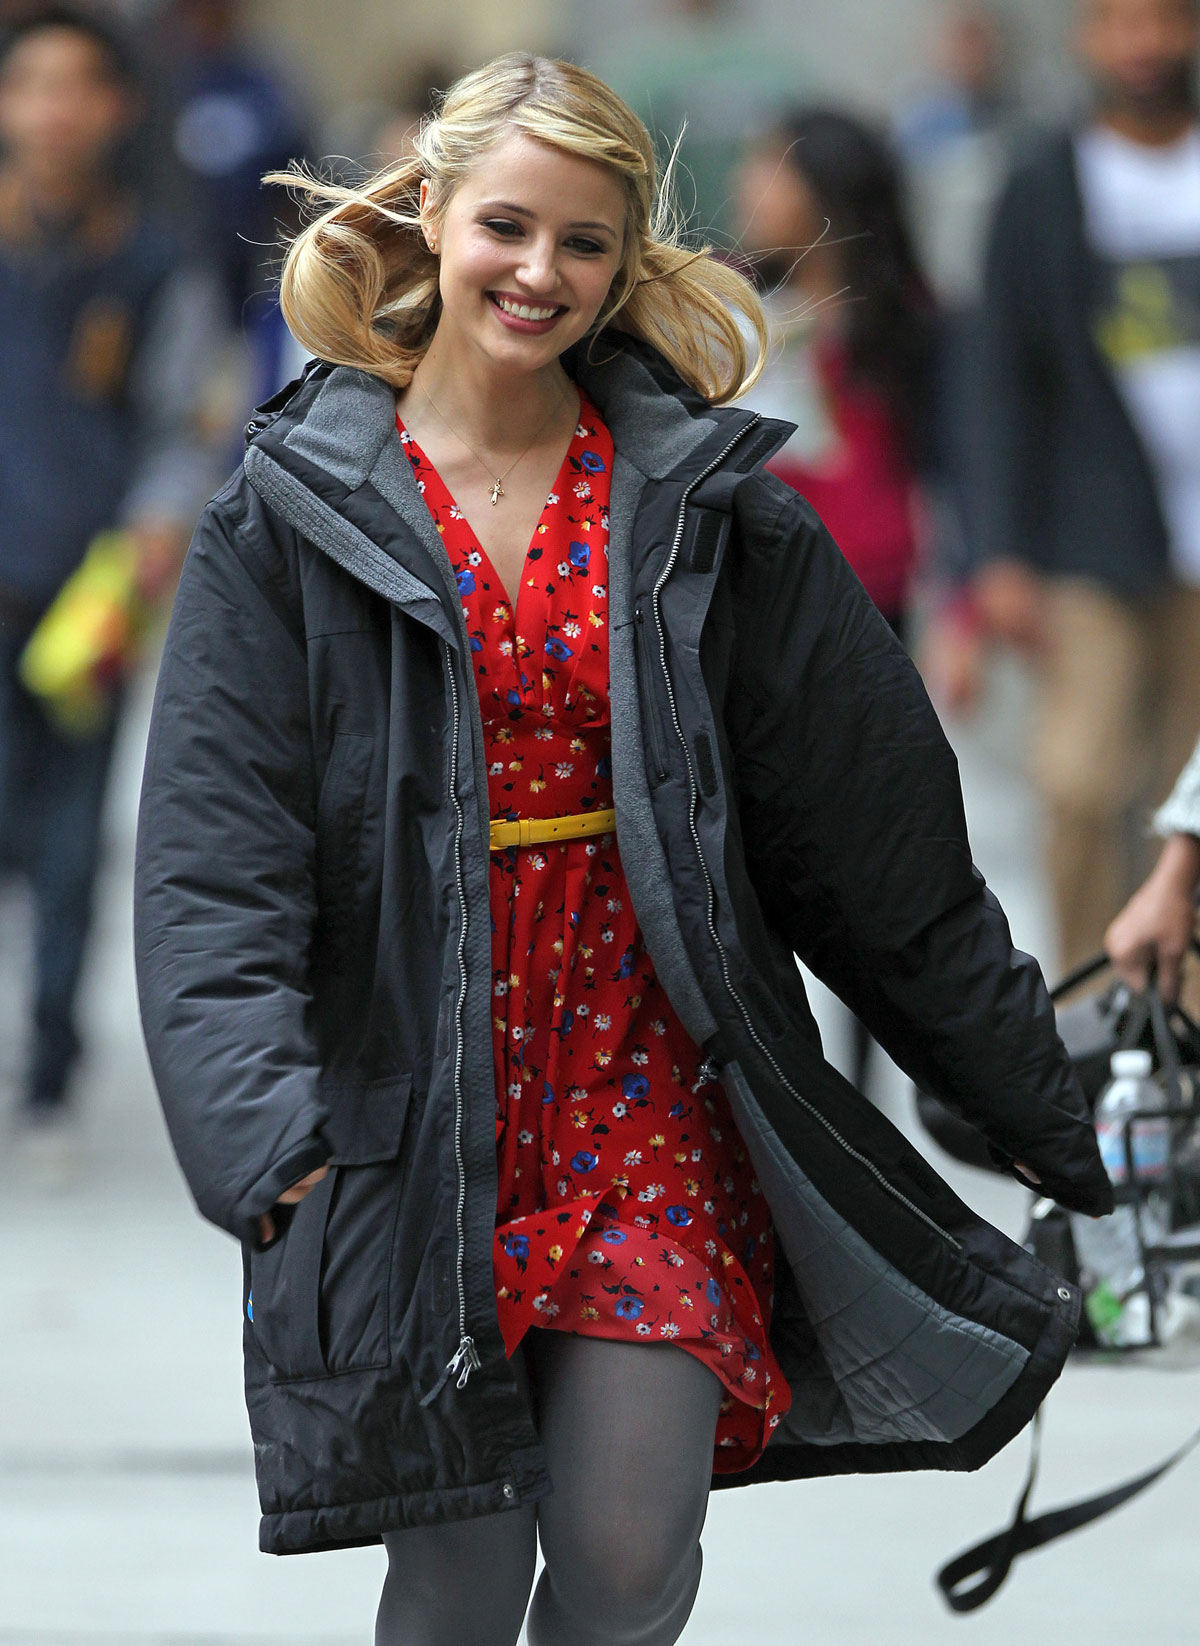 DIANNA AGRON on the Set of Glee in Los Angeles – HawtCelebs